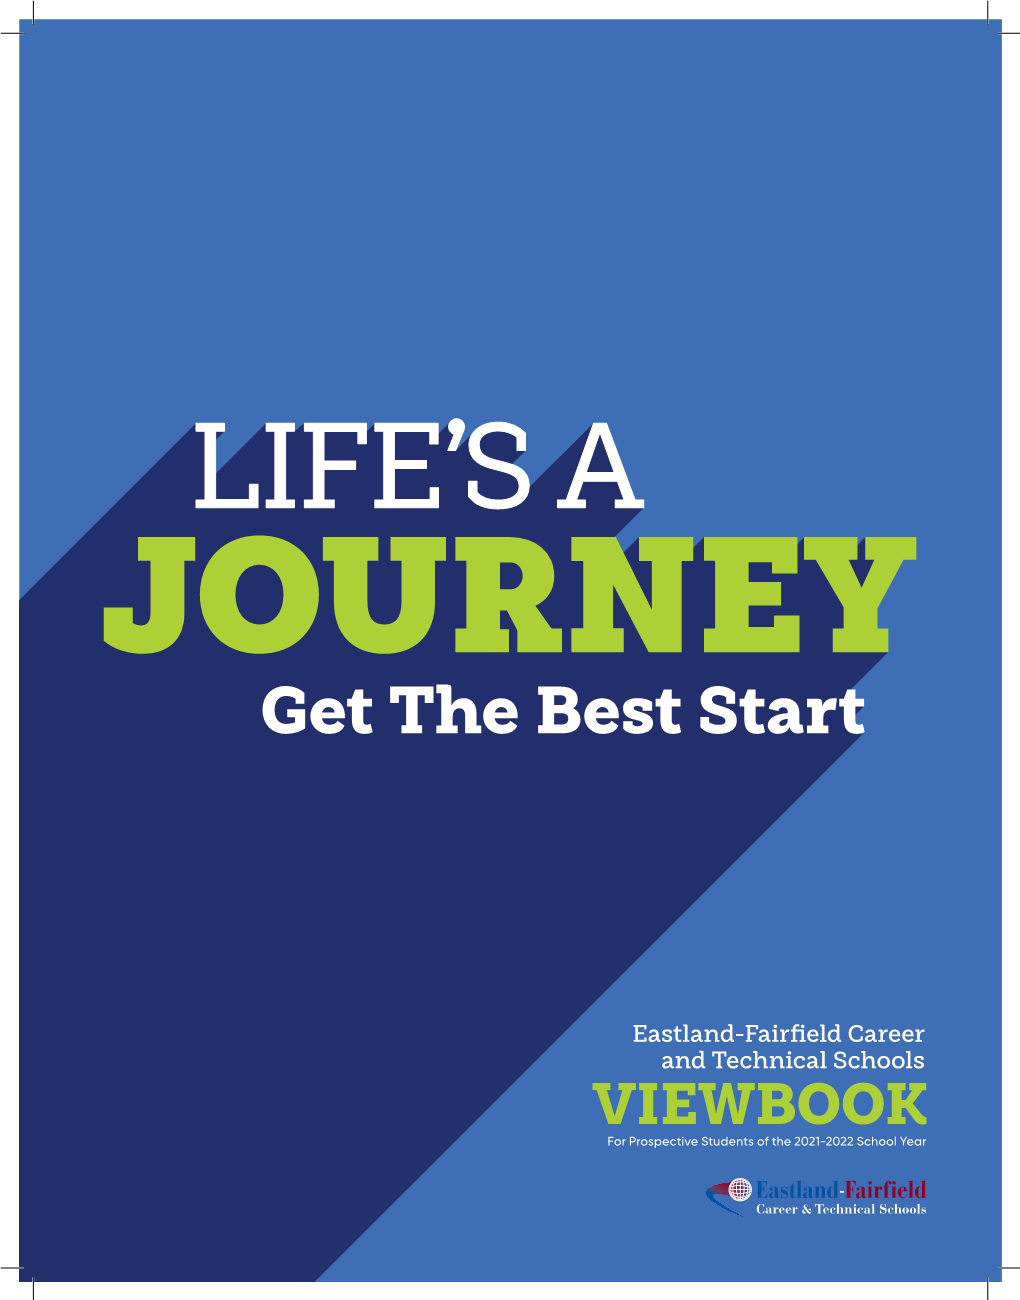 Download Our Admissions Viewbook